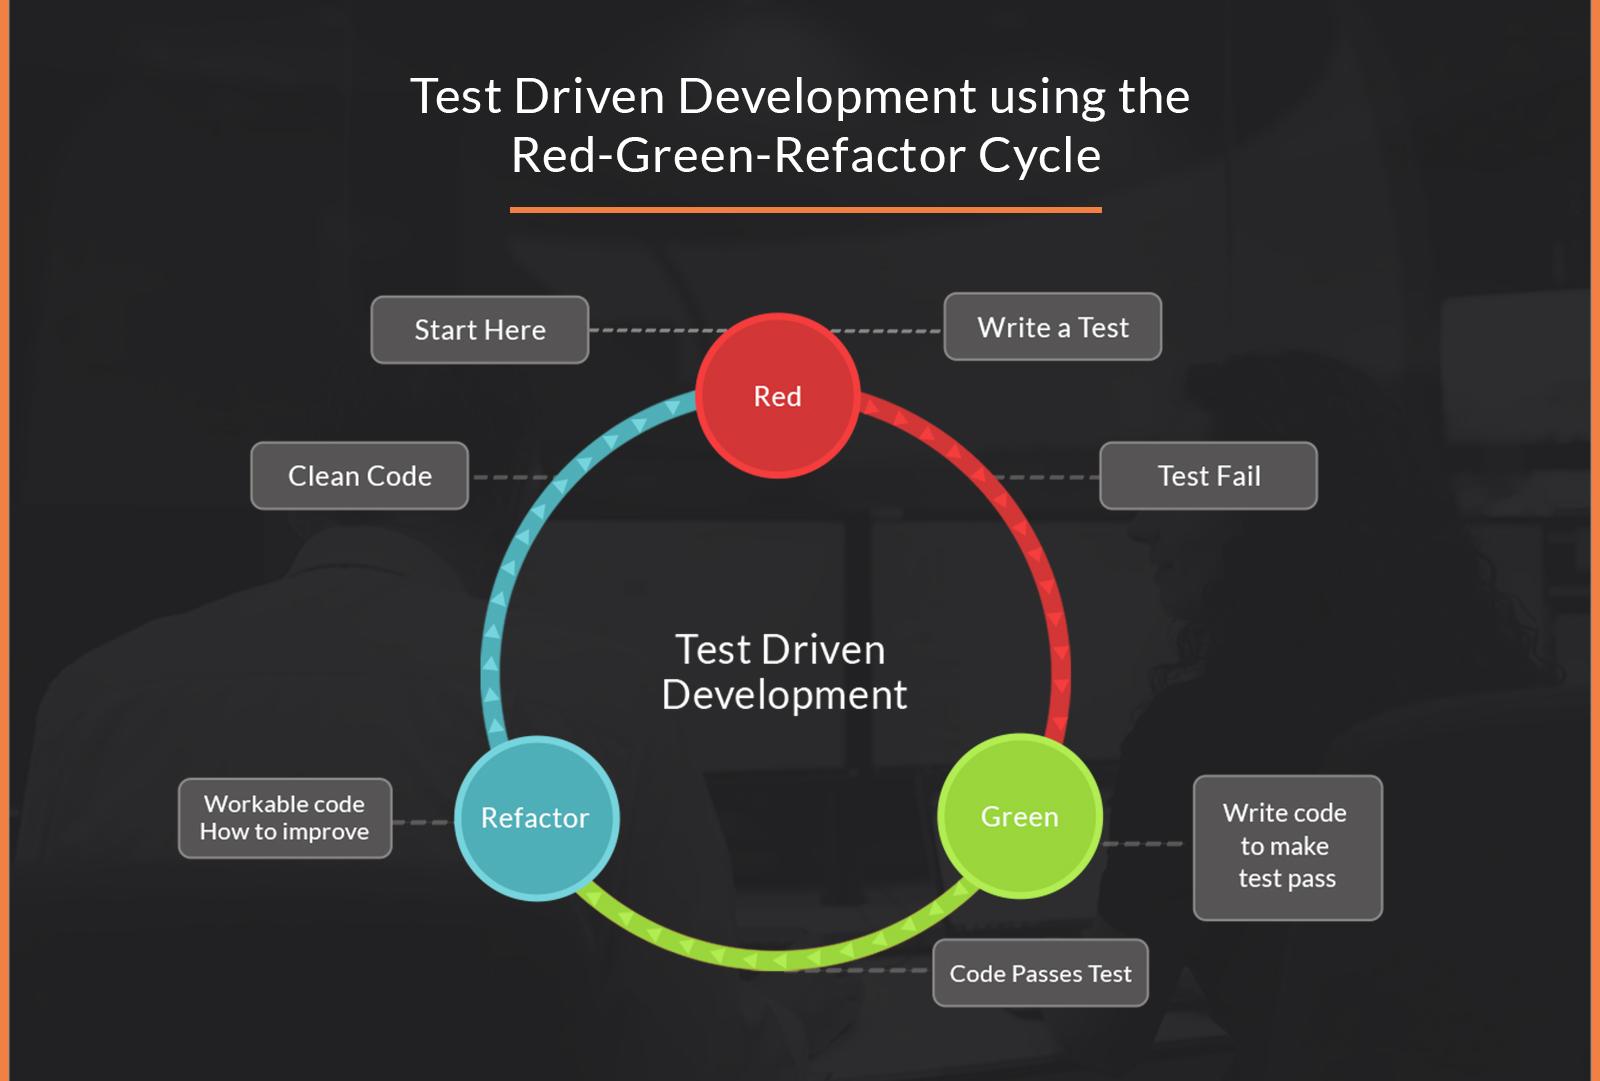 Test Driven Development with the Red-Green-Refactor Cycle